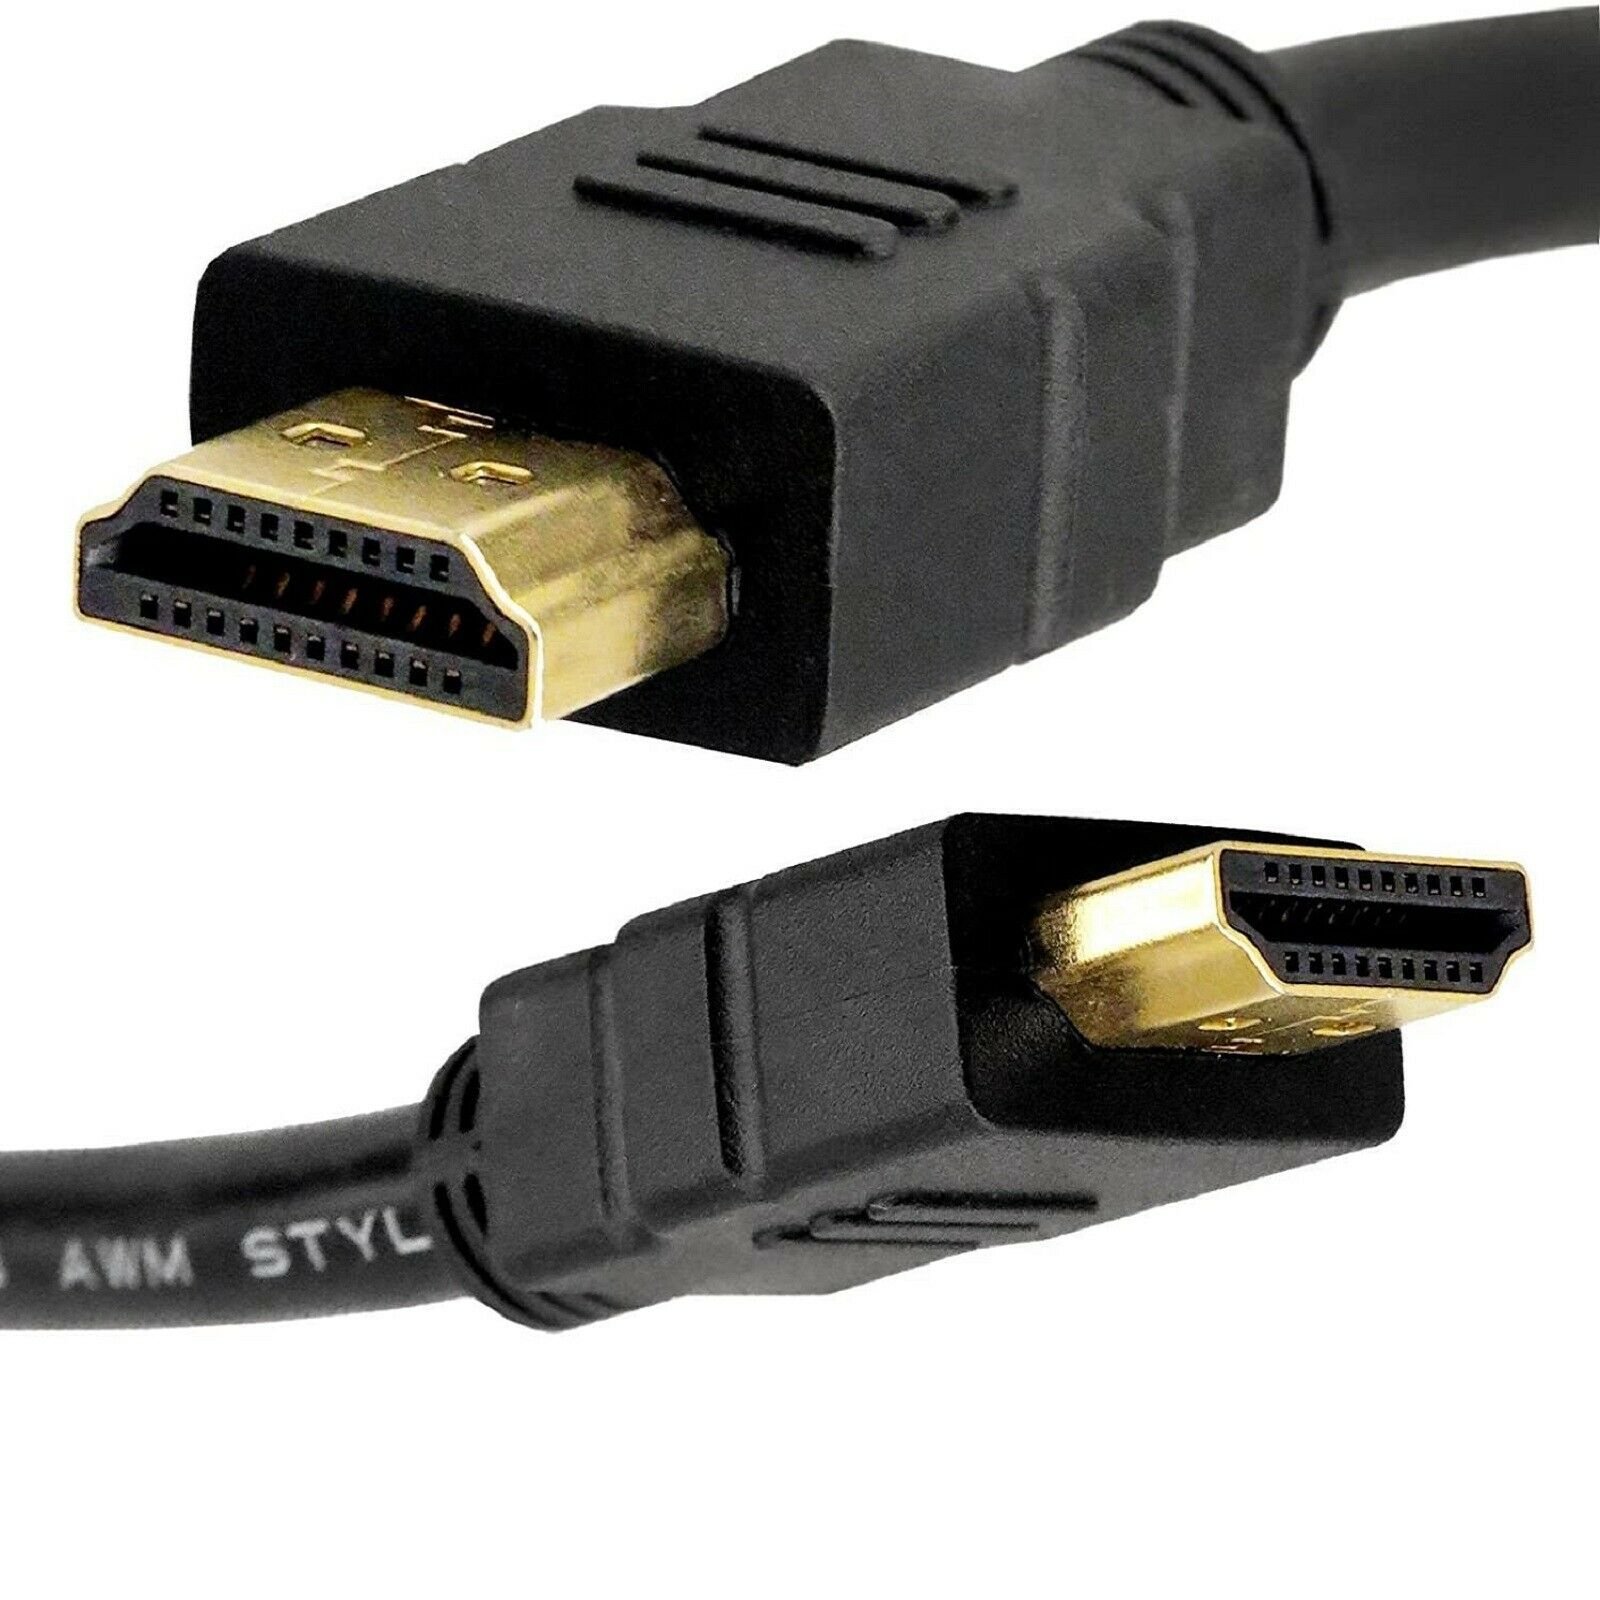 what ype of hdmi cable do i need to connect laptop to projector